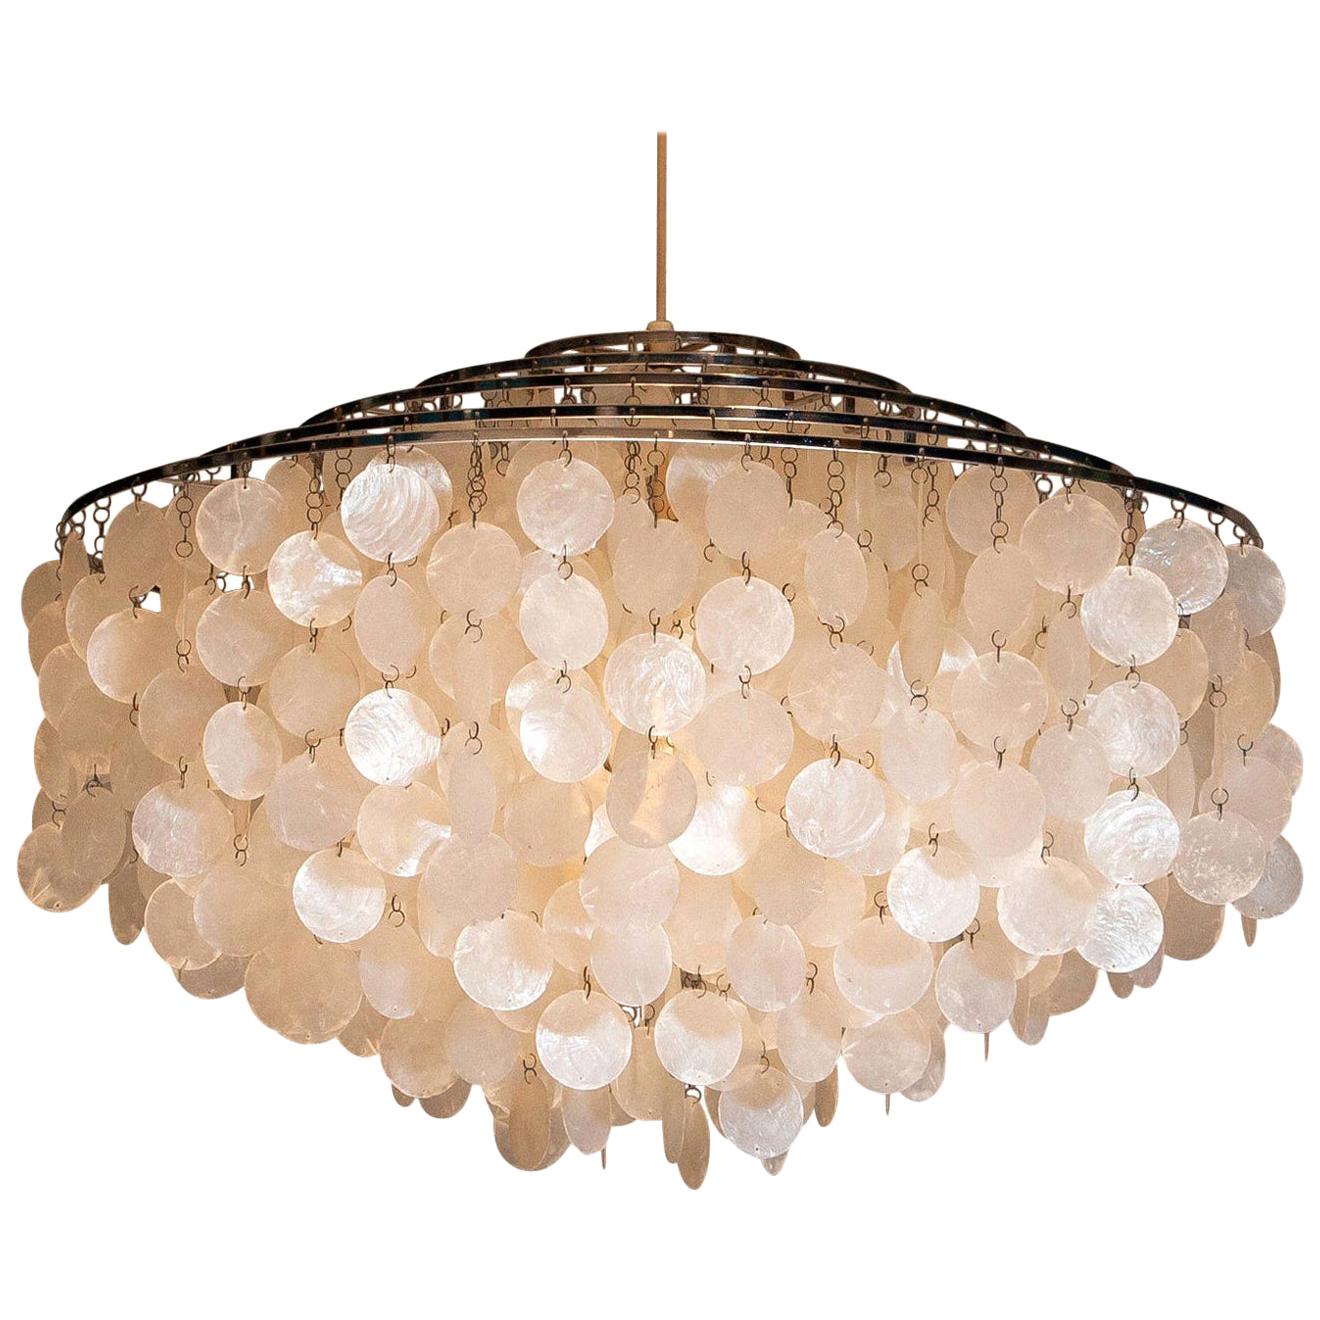 Beautiful and complete original extra-large capiz shell chandelier designed by Verner Panton for J. Luber Ag in Switzerland, 1964.
This extra large chandelier measures a diameter of 70cm. or 27.56